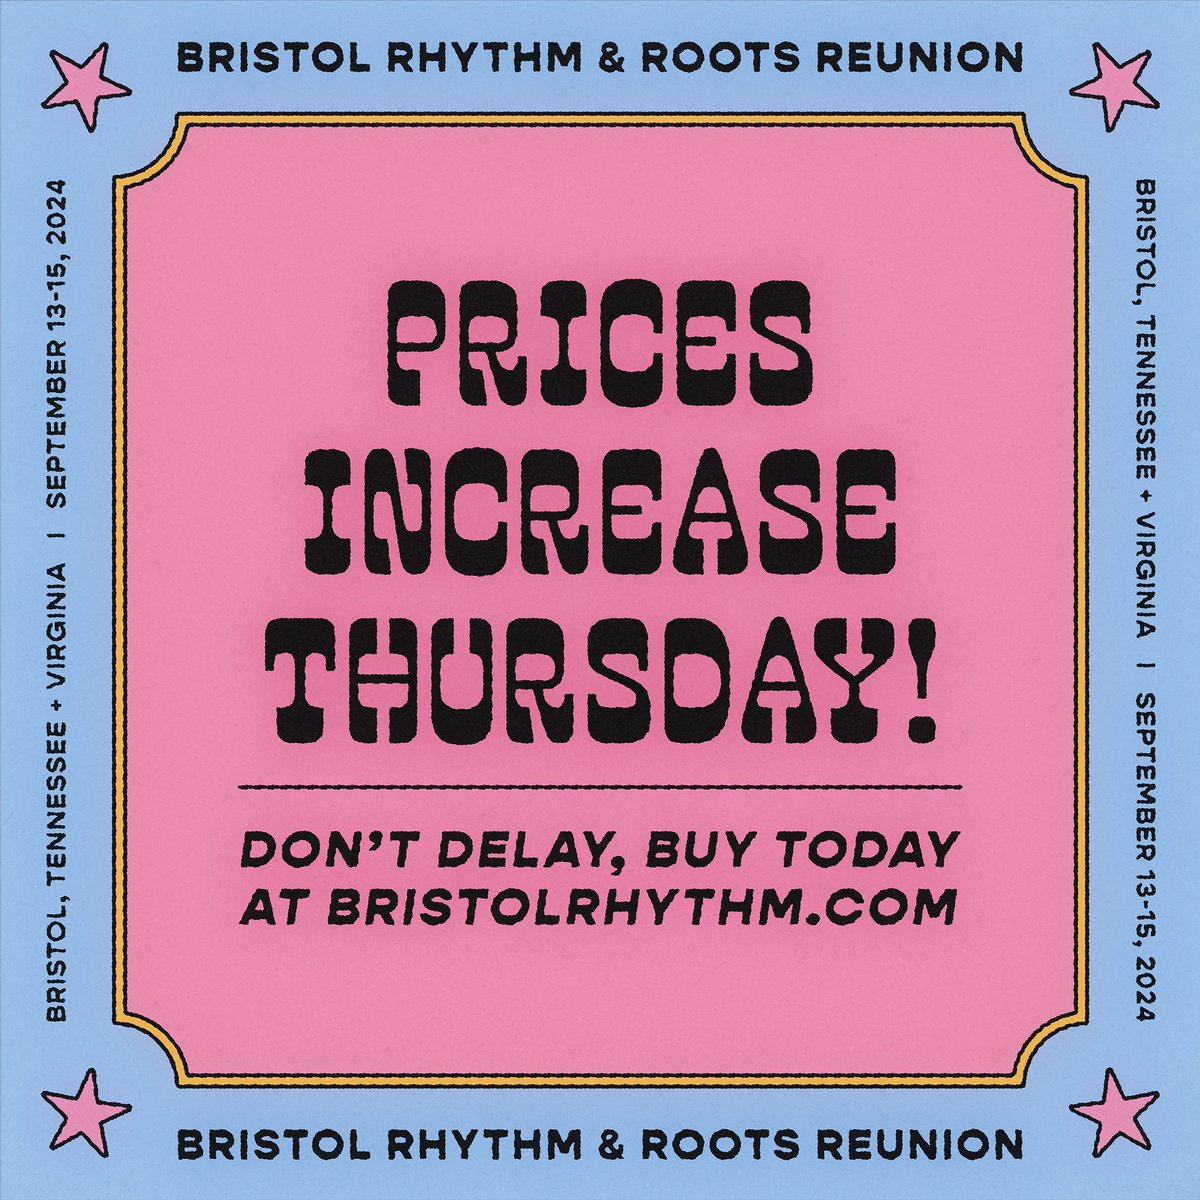 ⏳Don't delay, #BristolRhythm fam! Prices increase Thursday!! Head to BristolRhythm.com to secure your tickets at the lowest available rate!